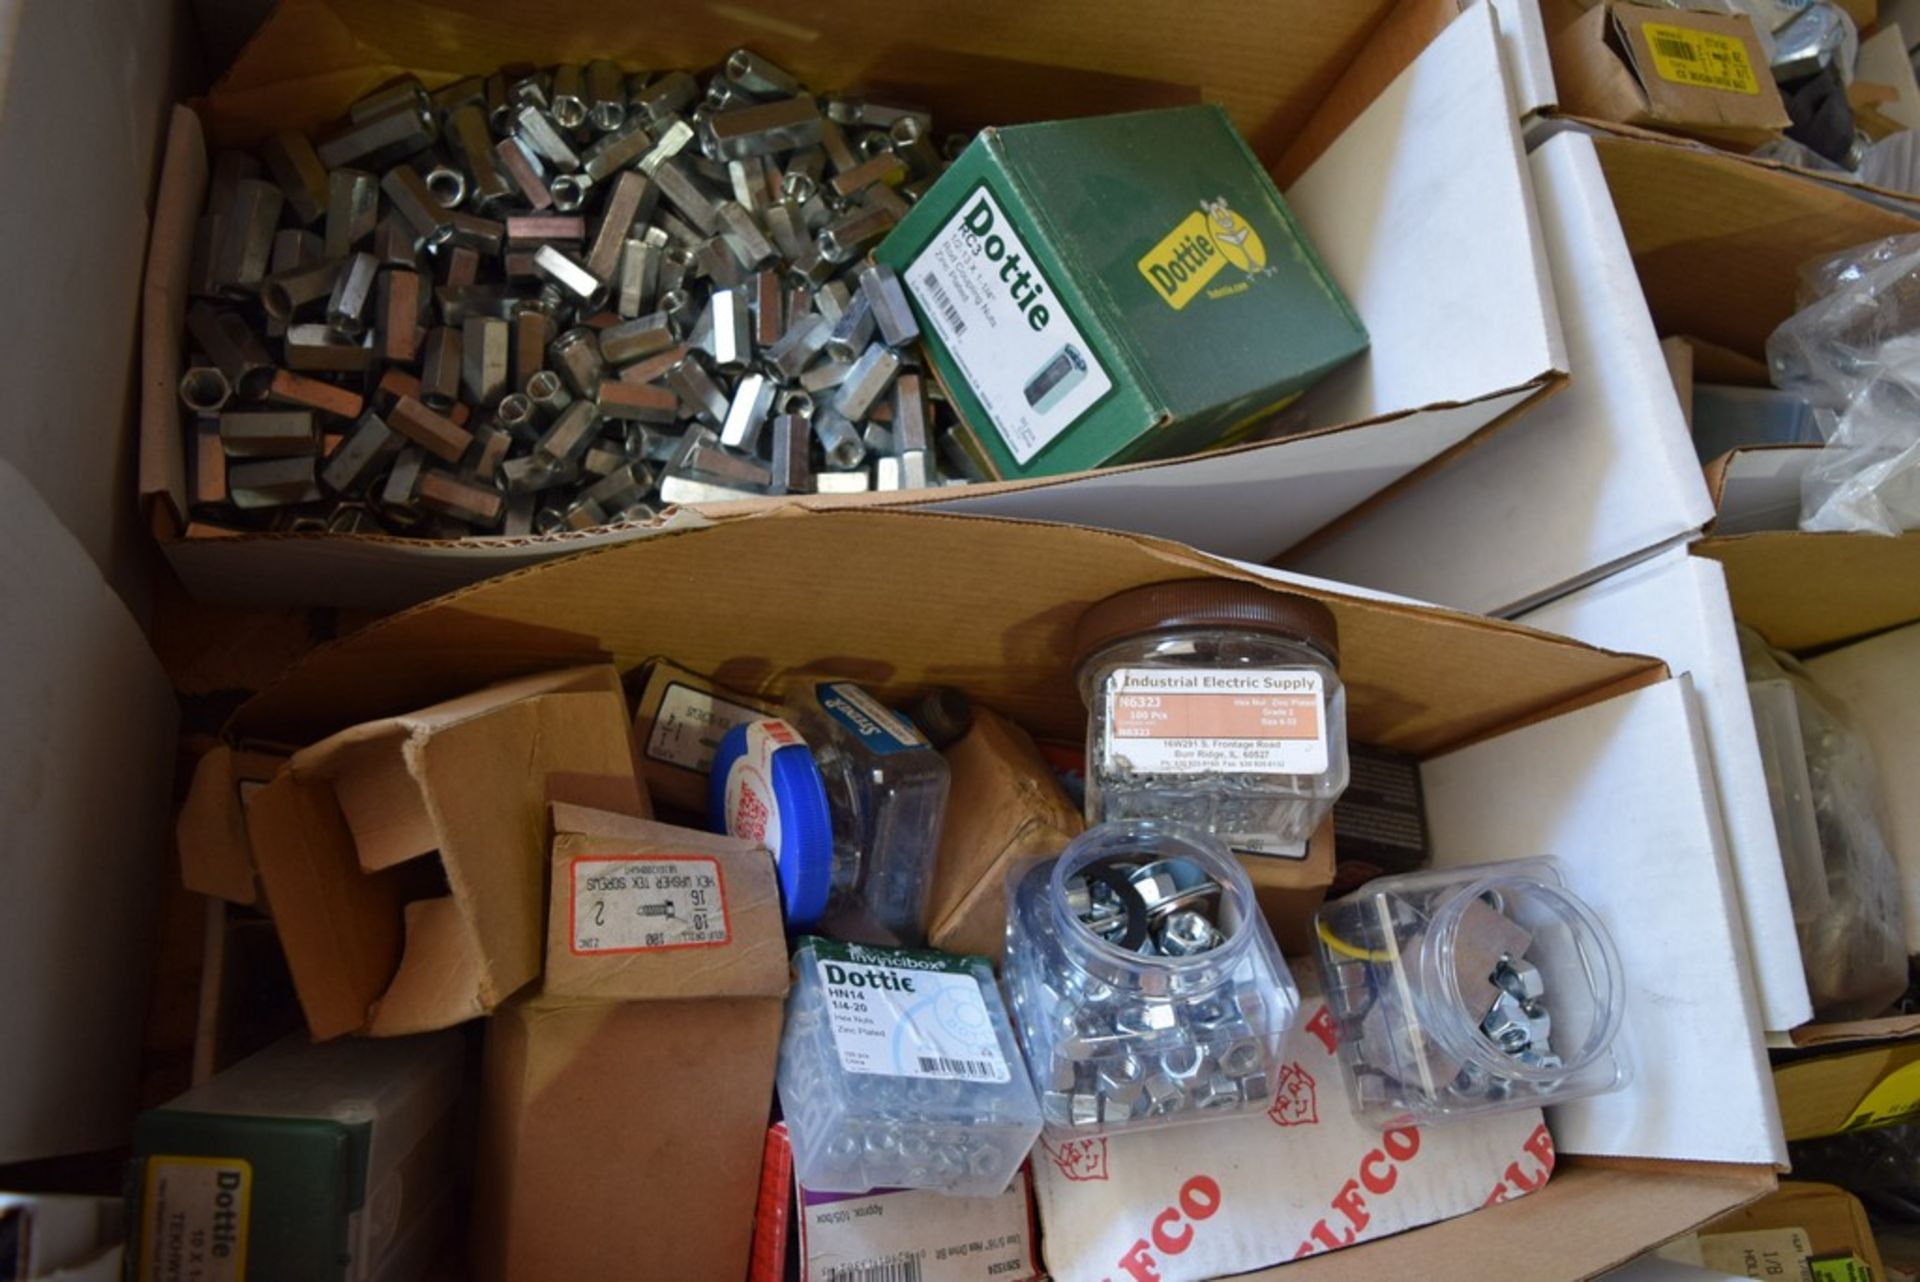 BOXES OF ASSORTED HARDWARE, INCLUDING WASHERS, BOLTS, NUTS, COUPLINGS, LOCKNUTS, ETC. - Image 2 of 3